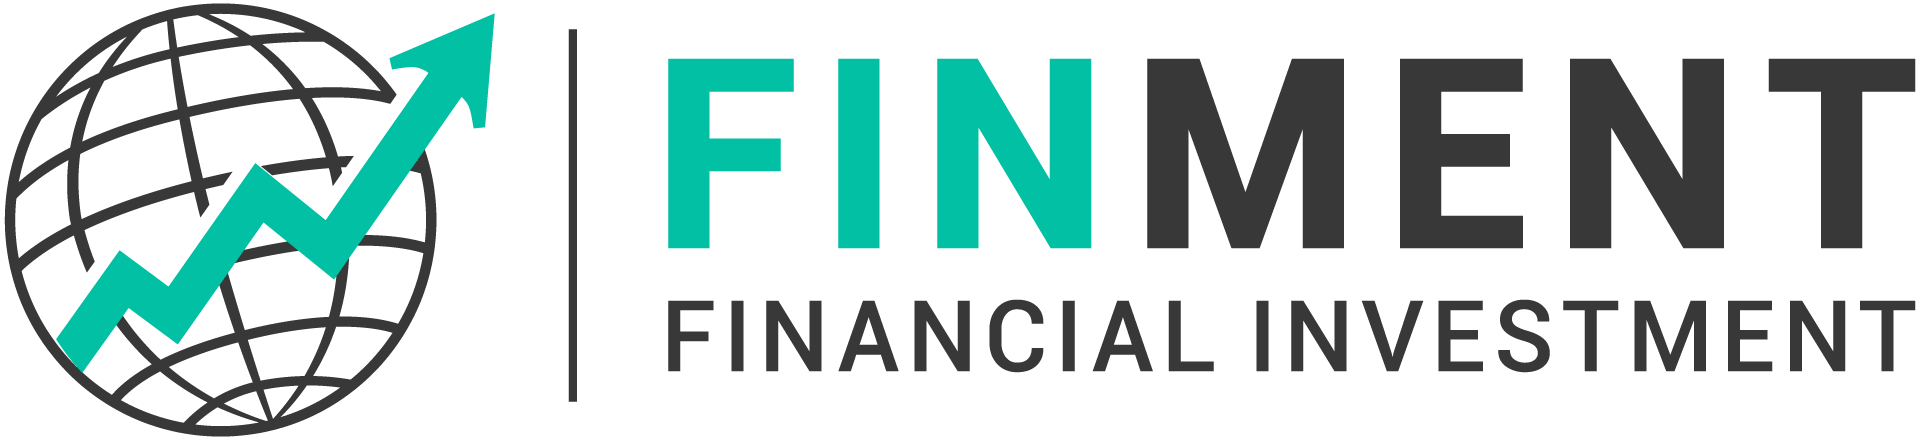 FinMent - Financial Investment